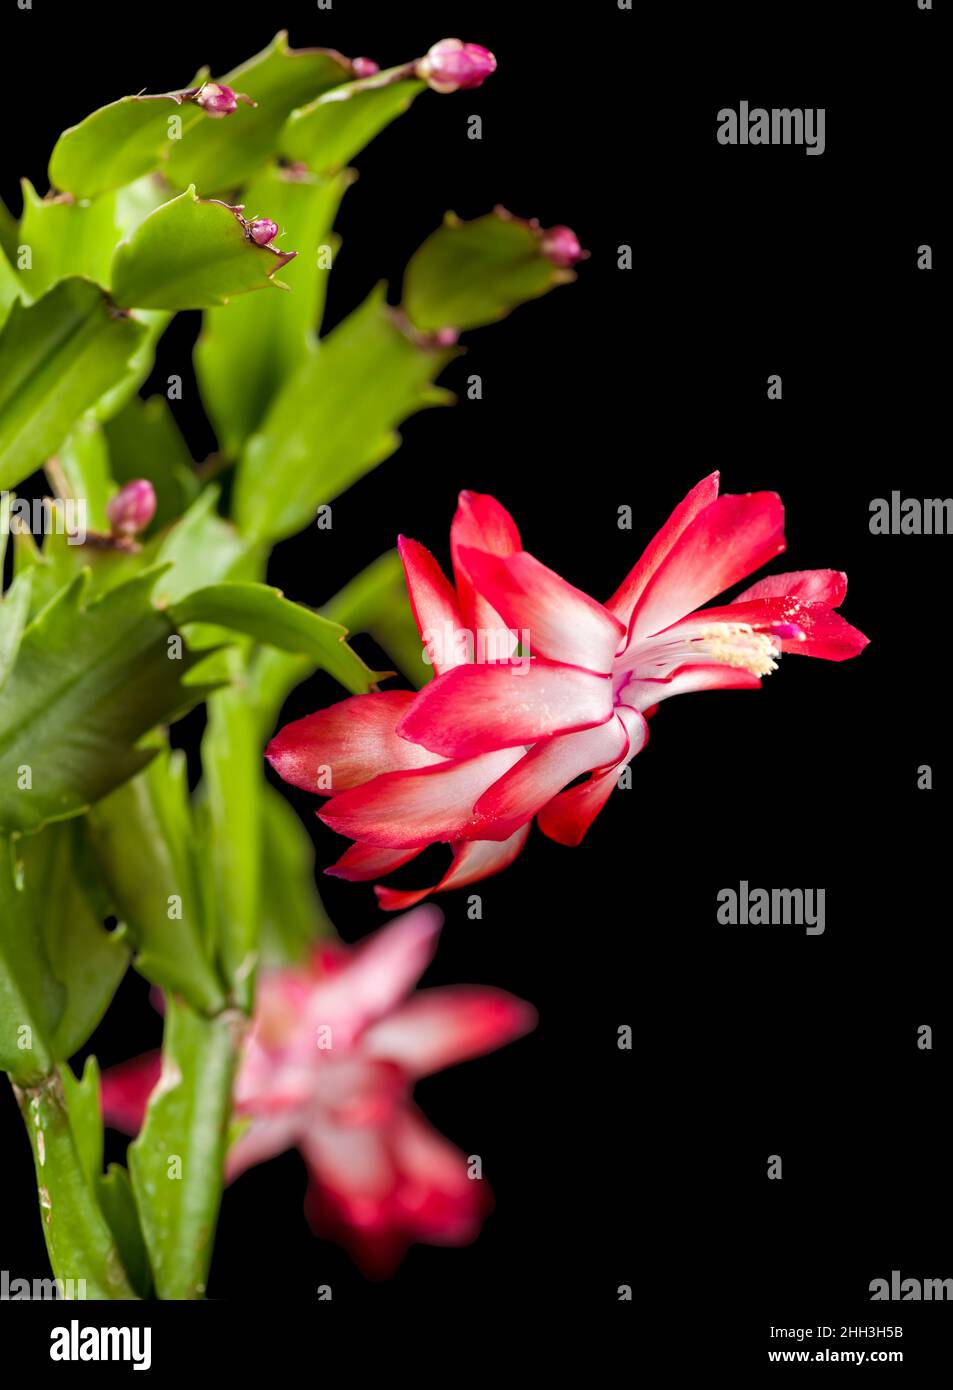 Close-up view of a Christmas cactus (lat: Schlumbergera) flower isolated on black at F5.6 aperture. Stock Photo